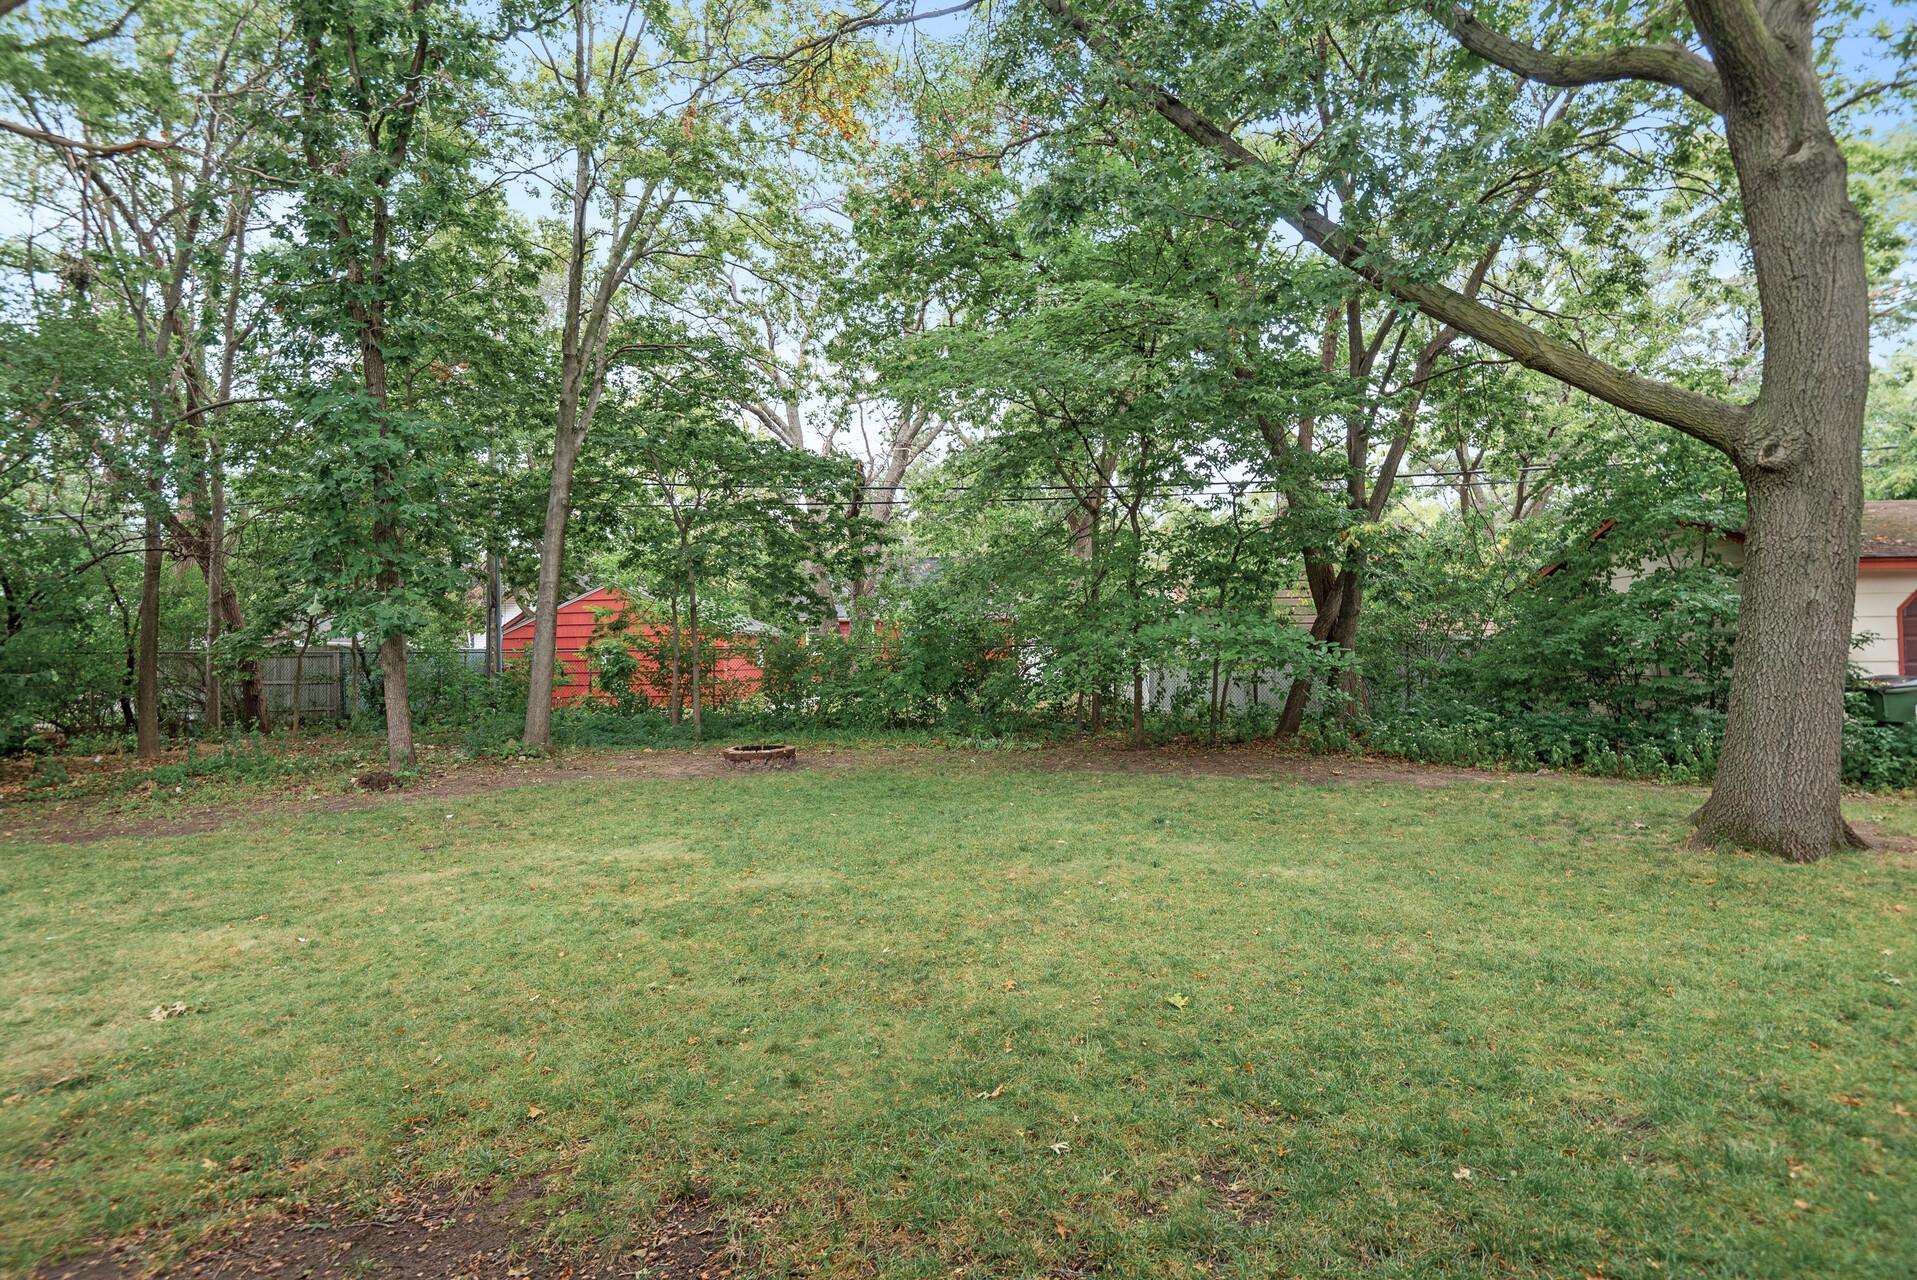 Mature trees and bushes outline and nice sized yard for endless opportunities